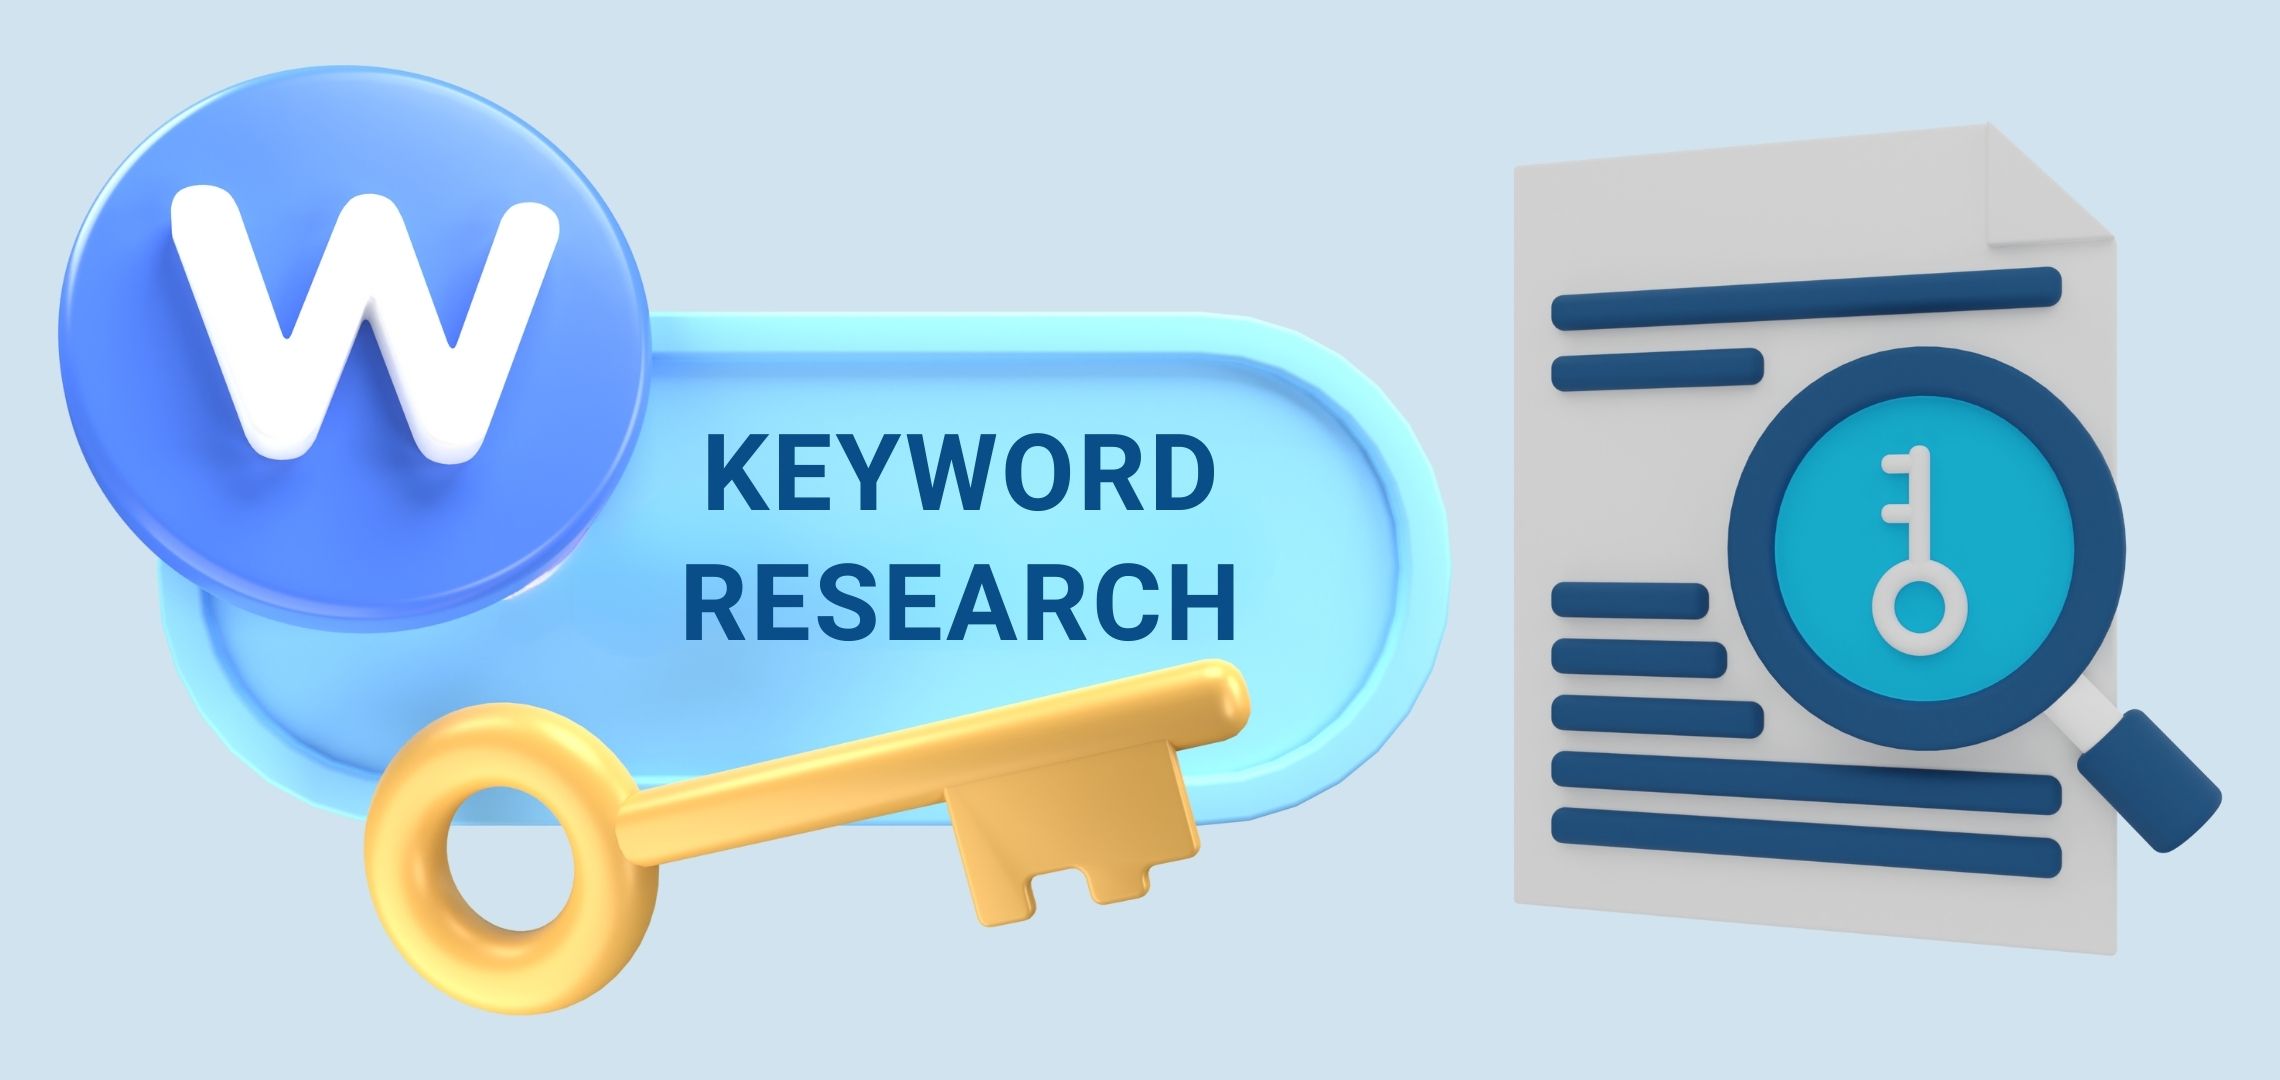 Ultimate Keyword Research for Search Engines